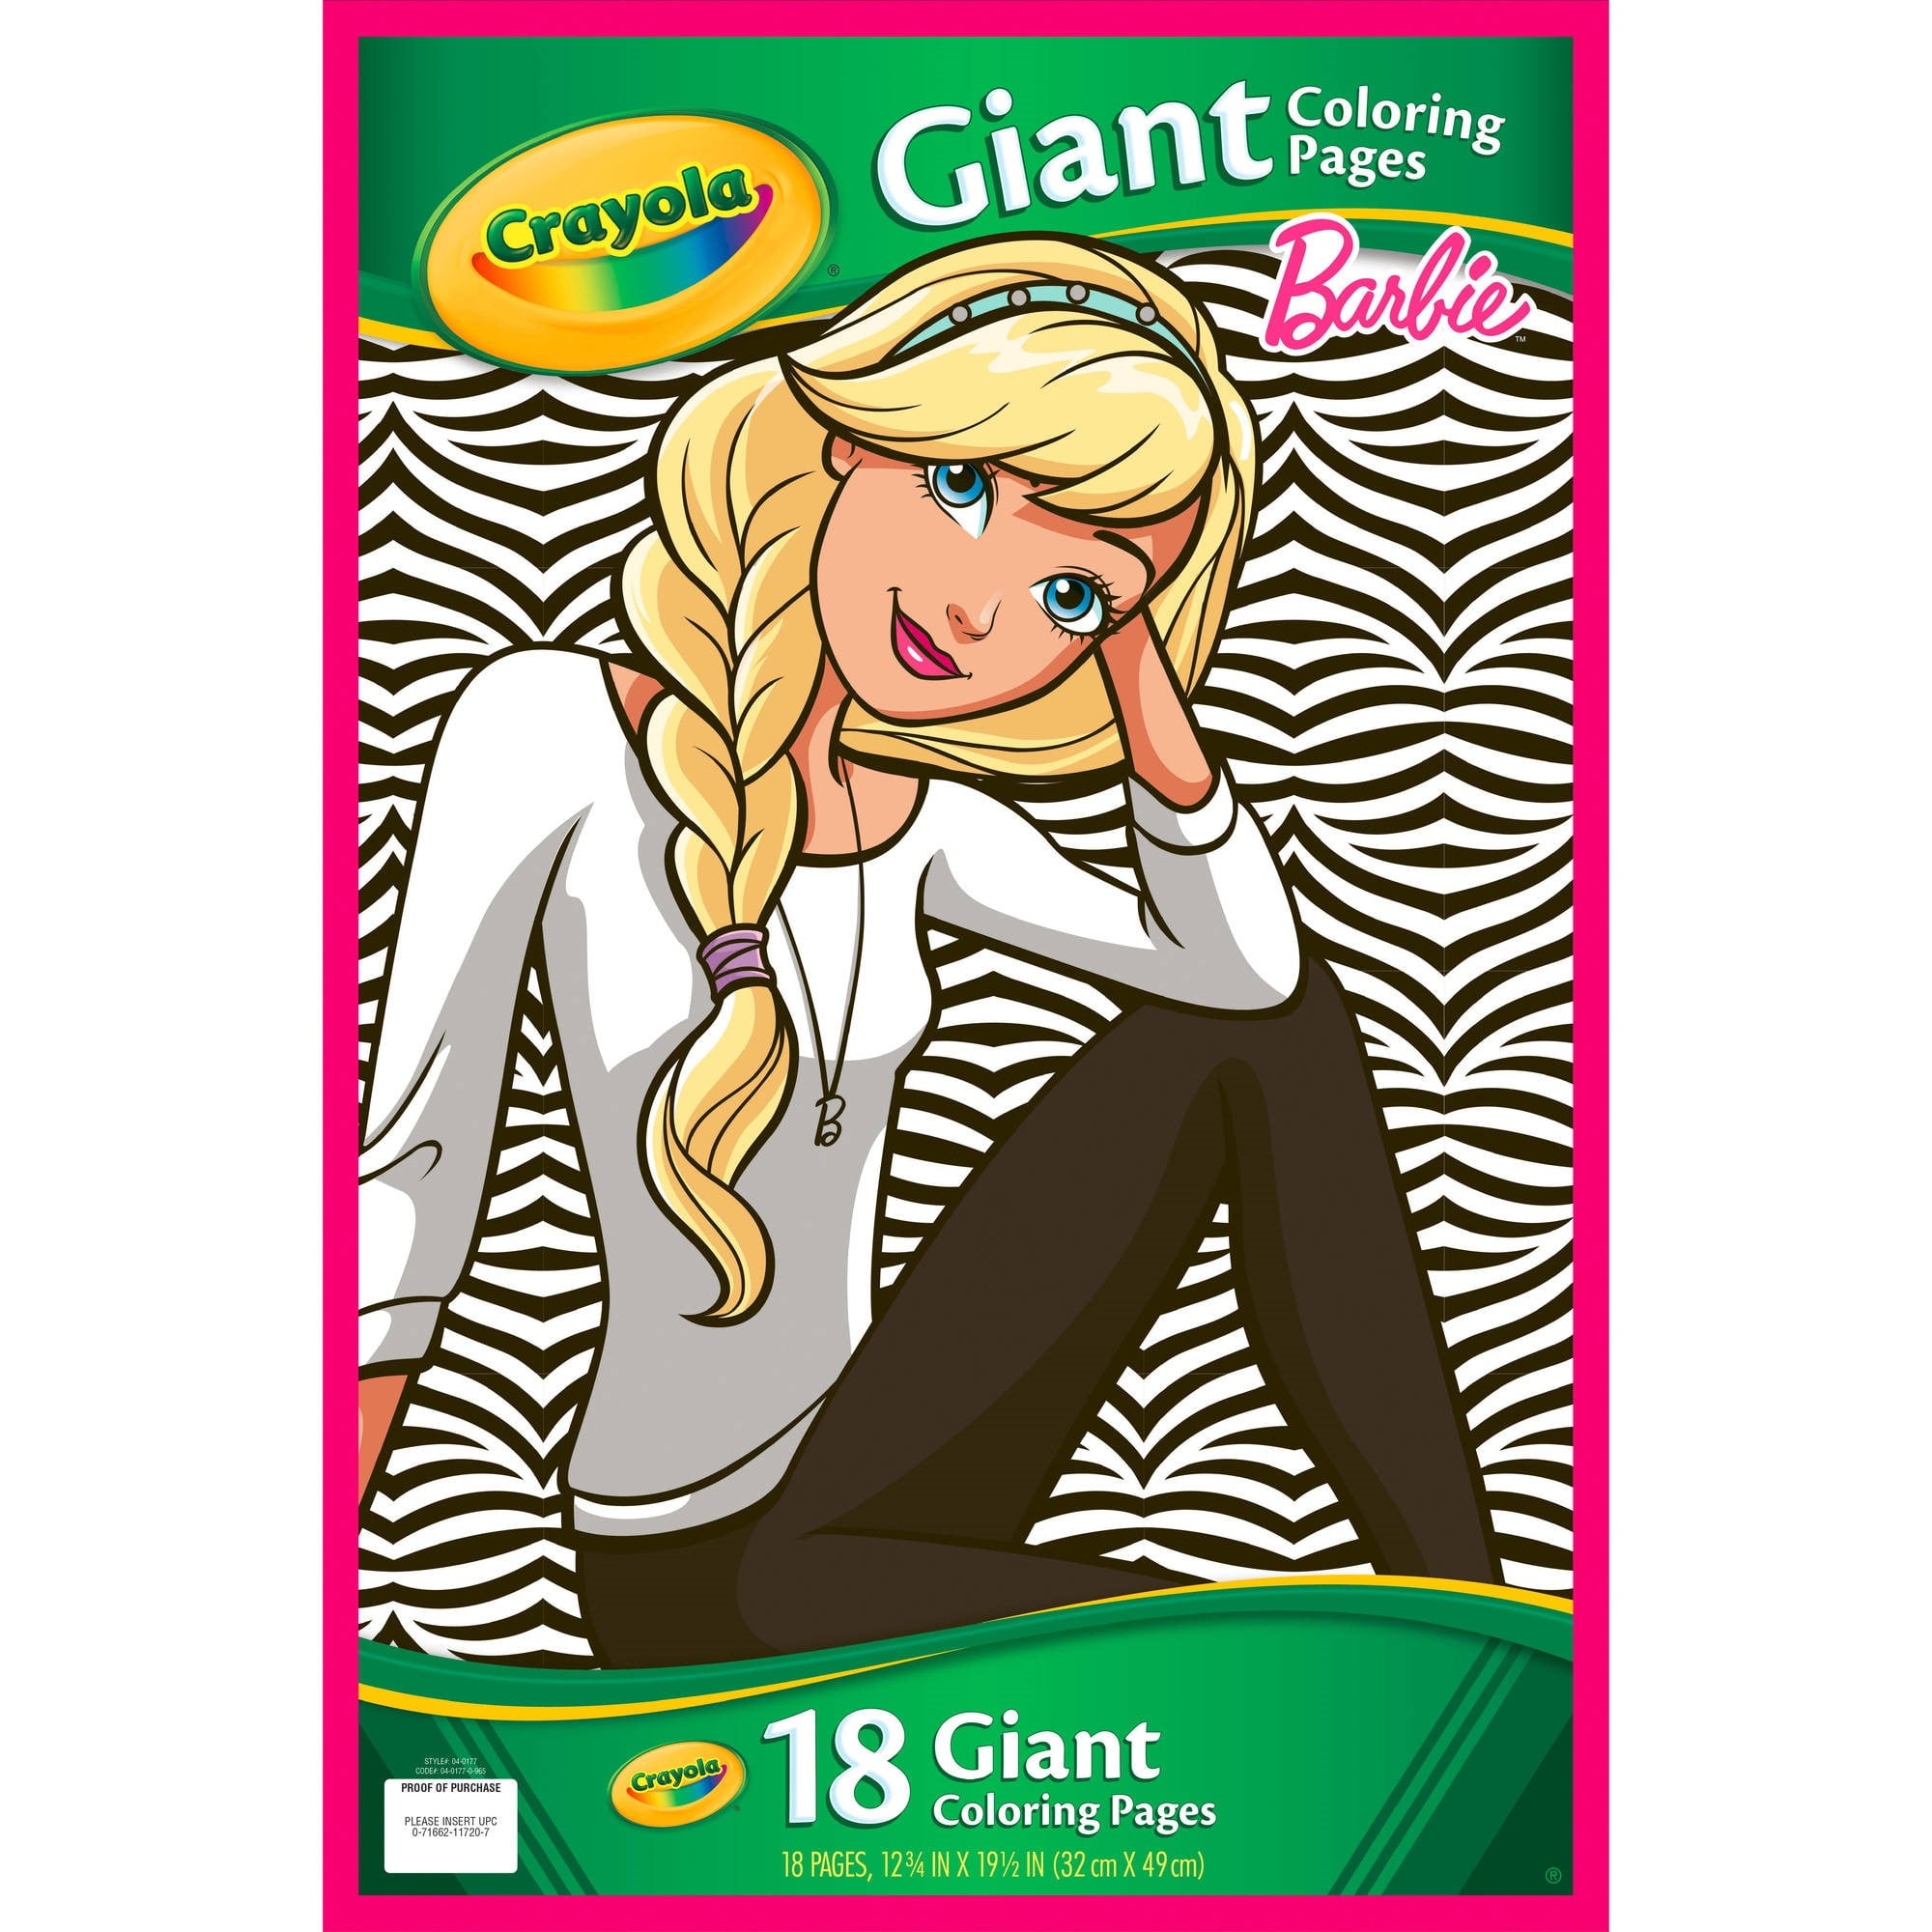 Crayola giant coloring pages barbie count